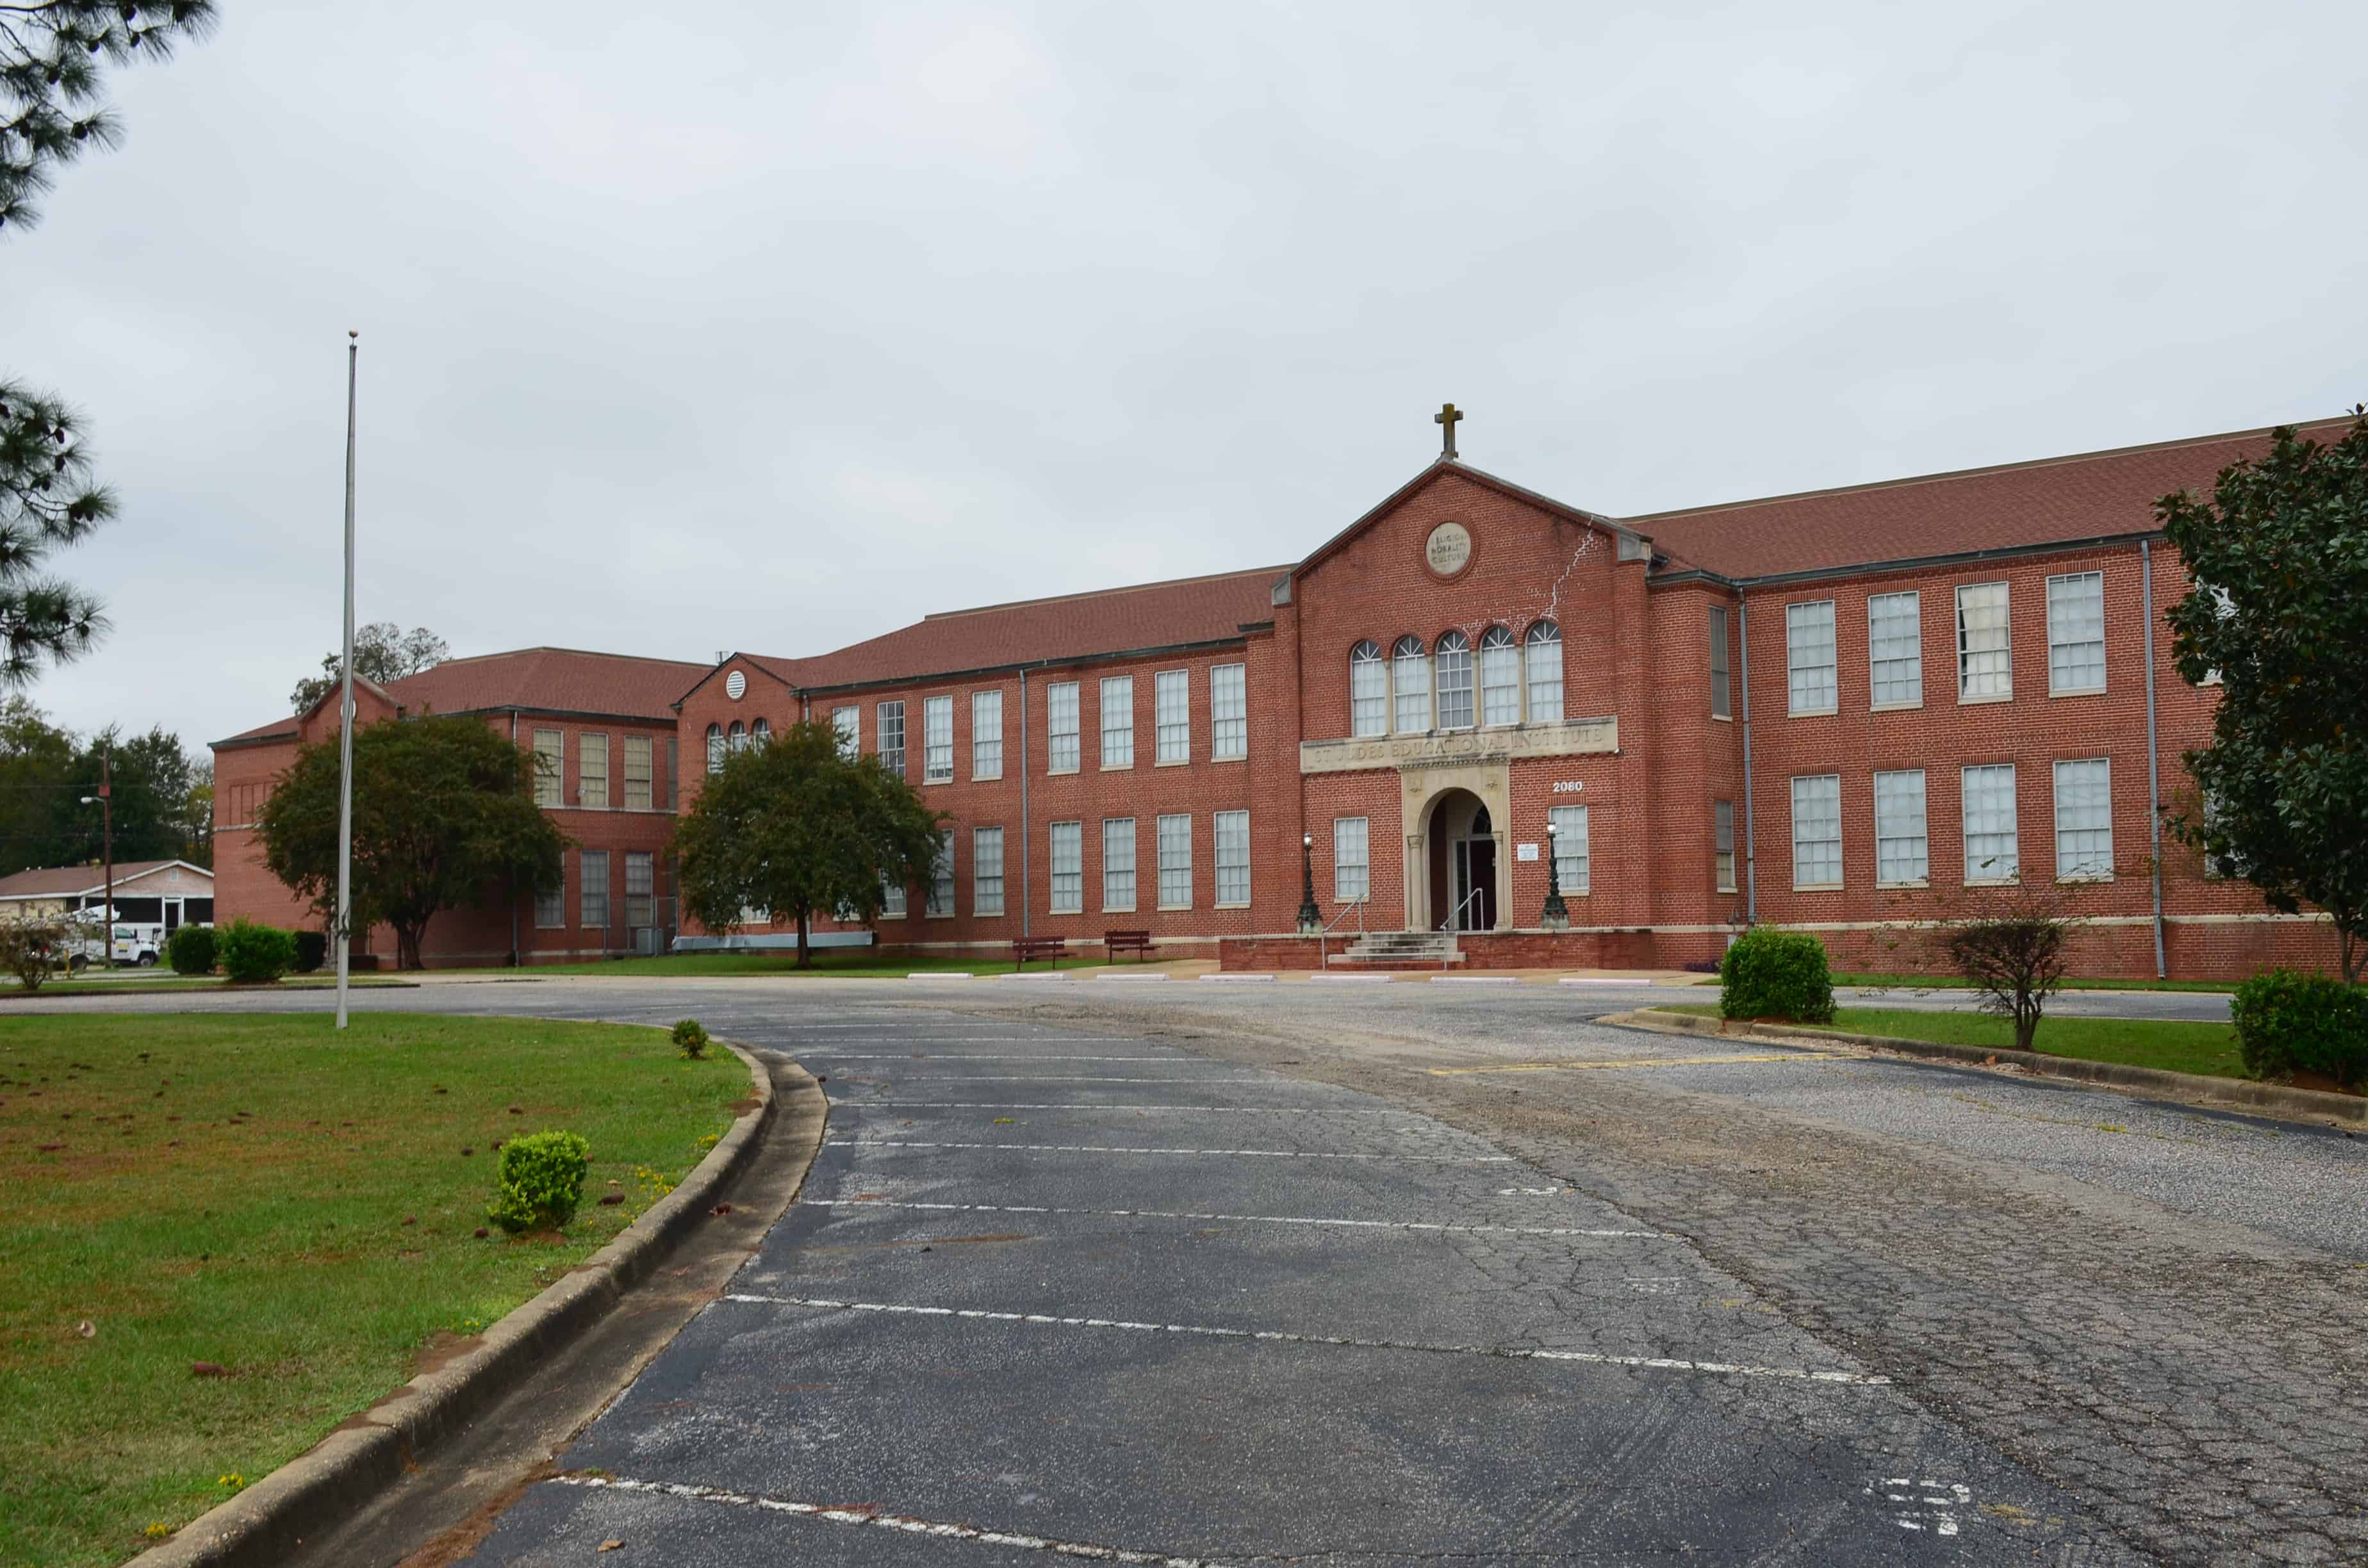 St. Jude Educational Institute at City of St. Jude on the Selma to Montgomery National Historic Trail in Alabama